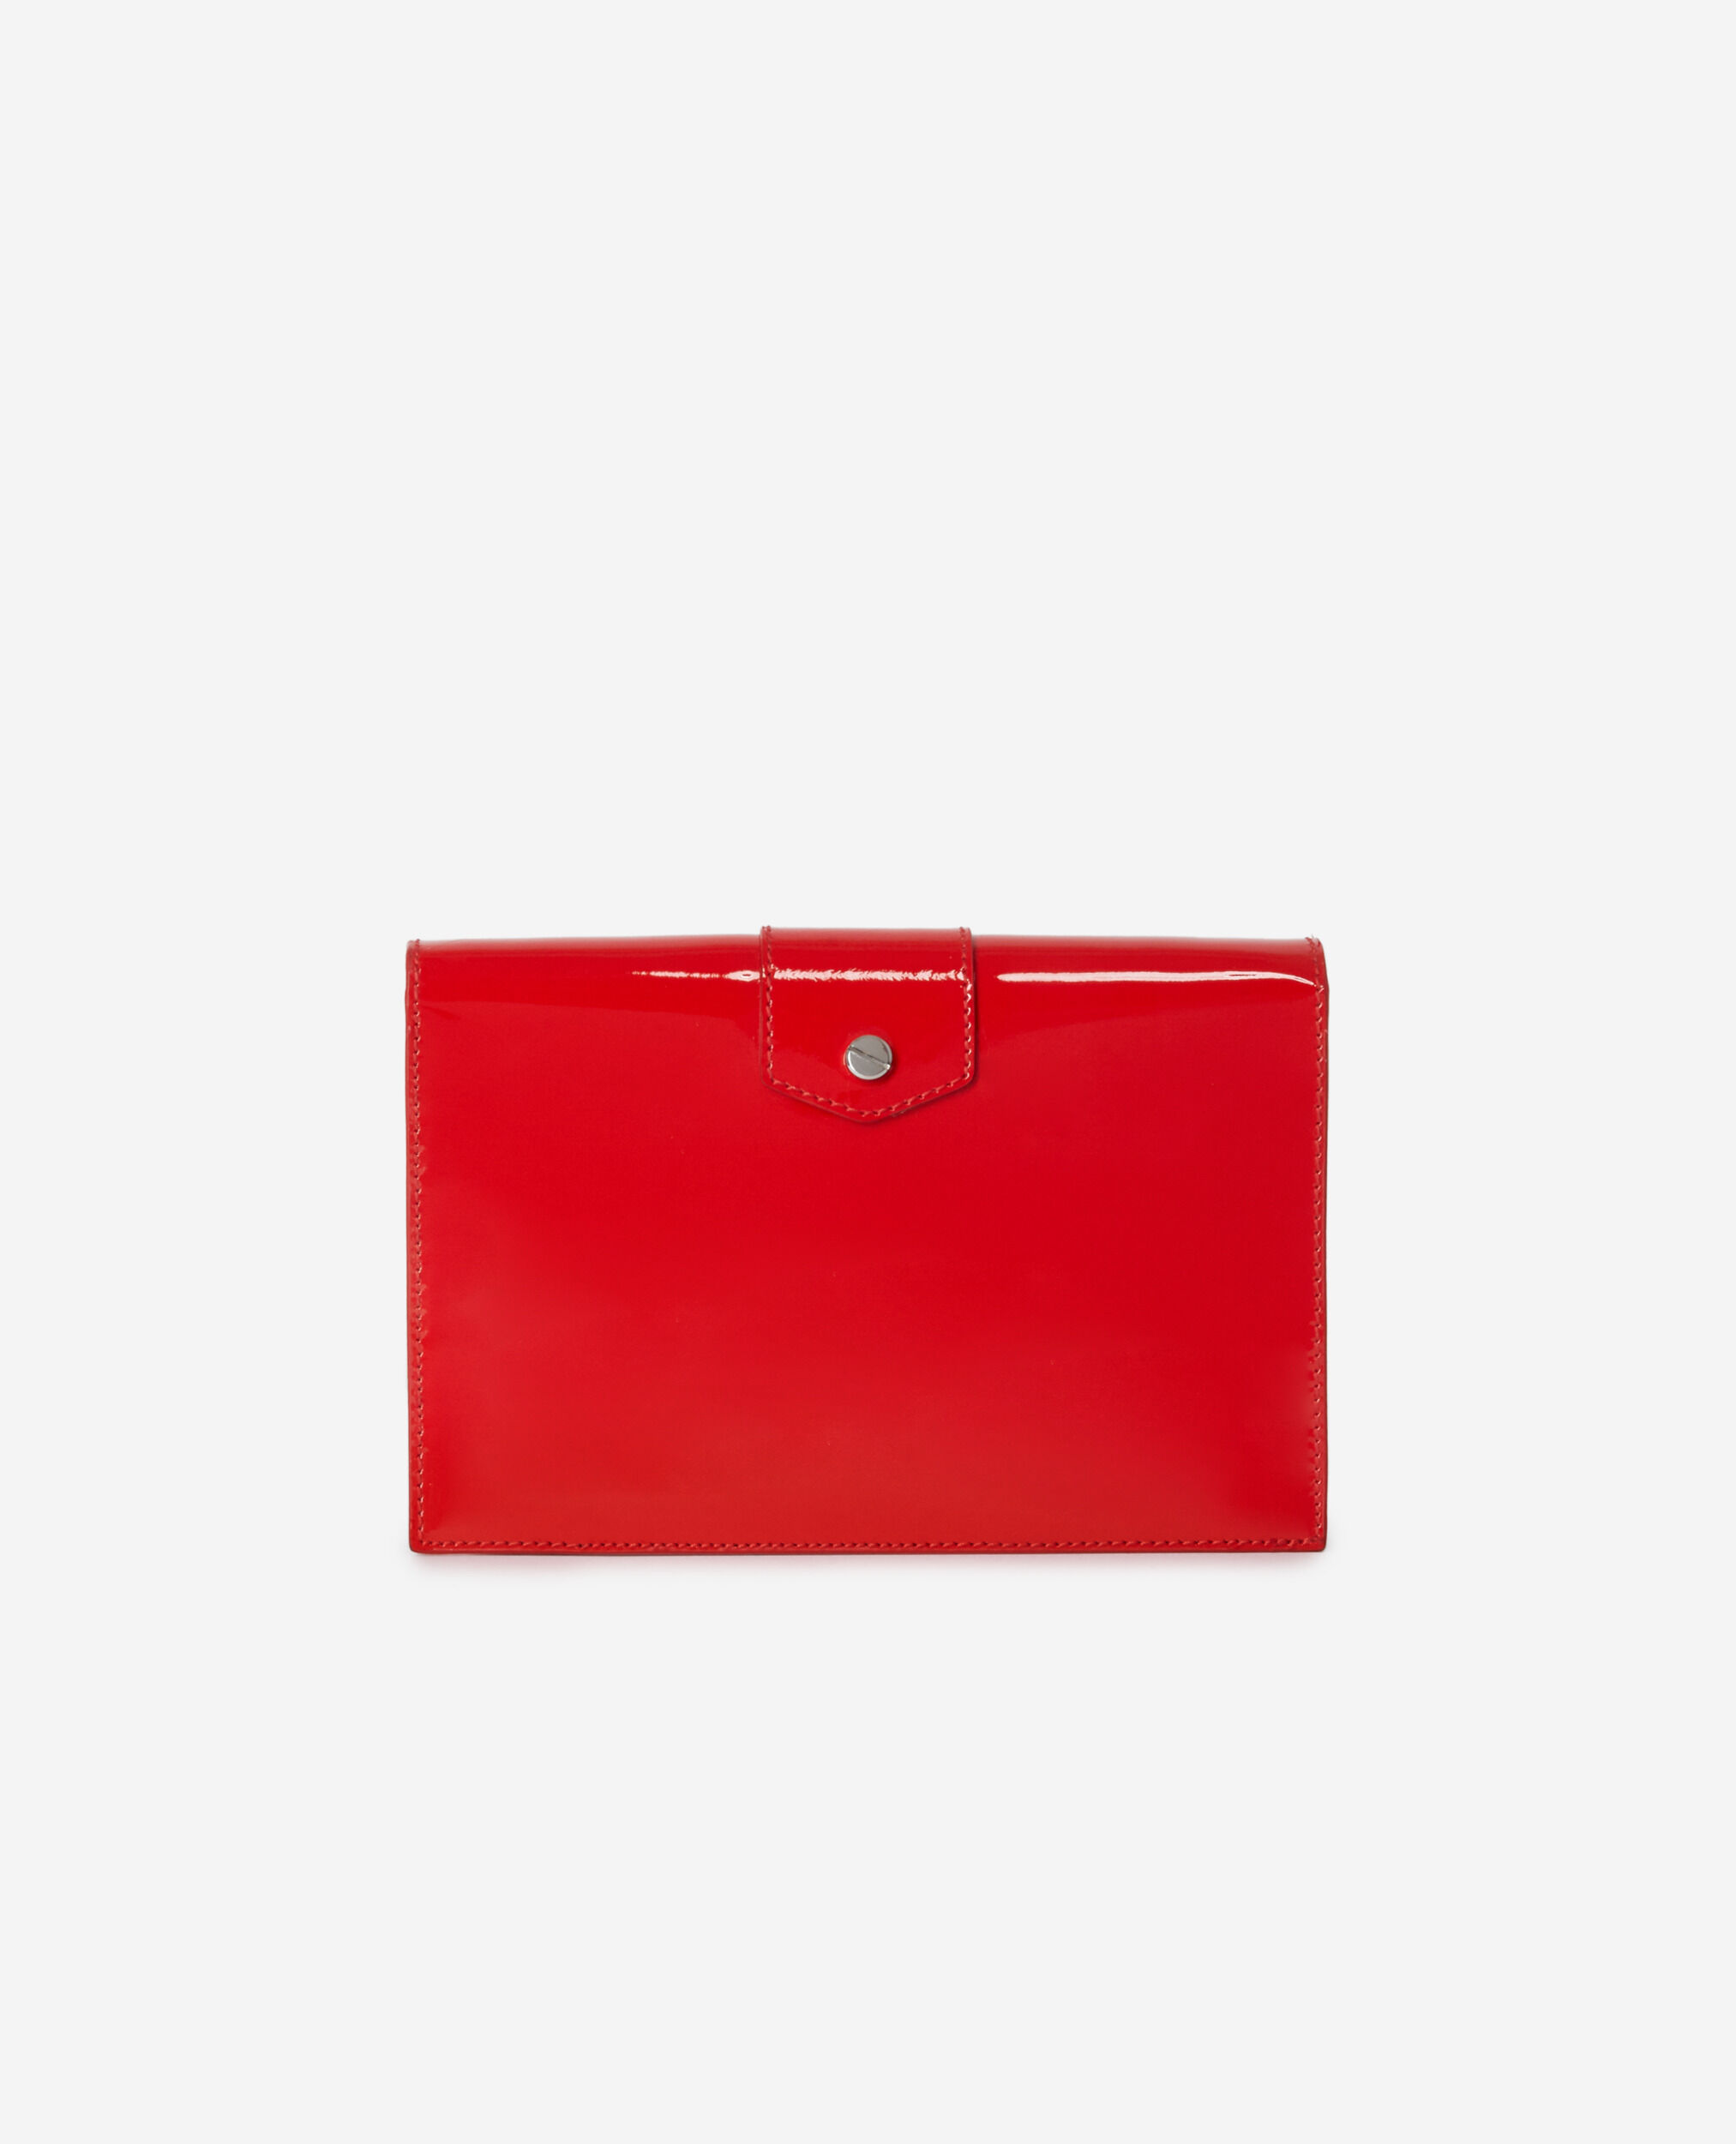 Medium Emily pouch in red leather, RED, hi-res image number null